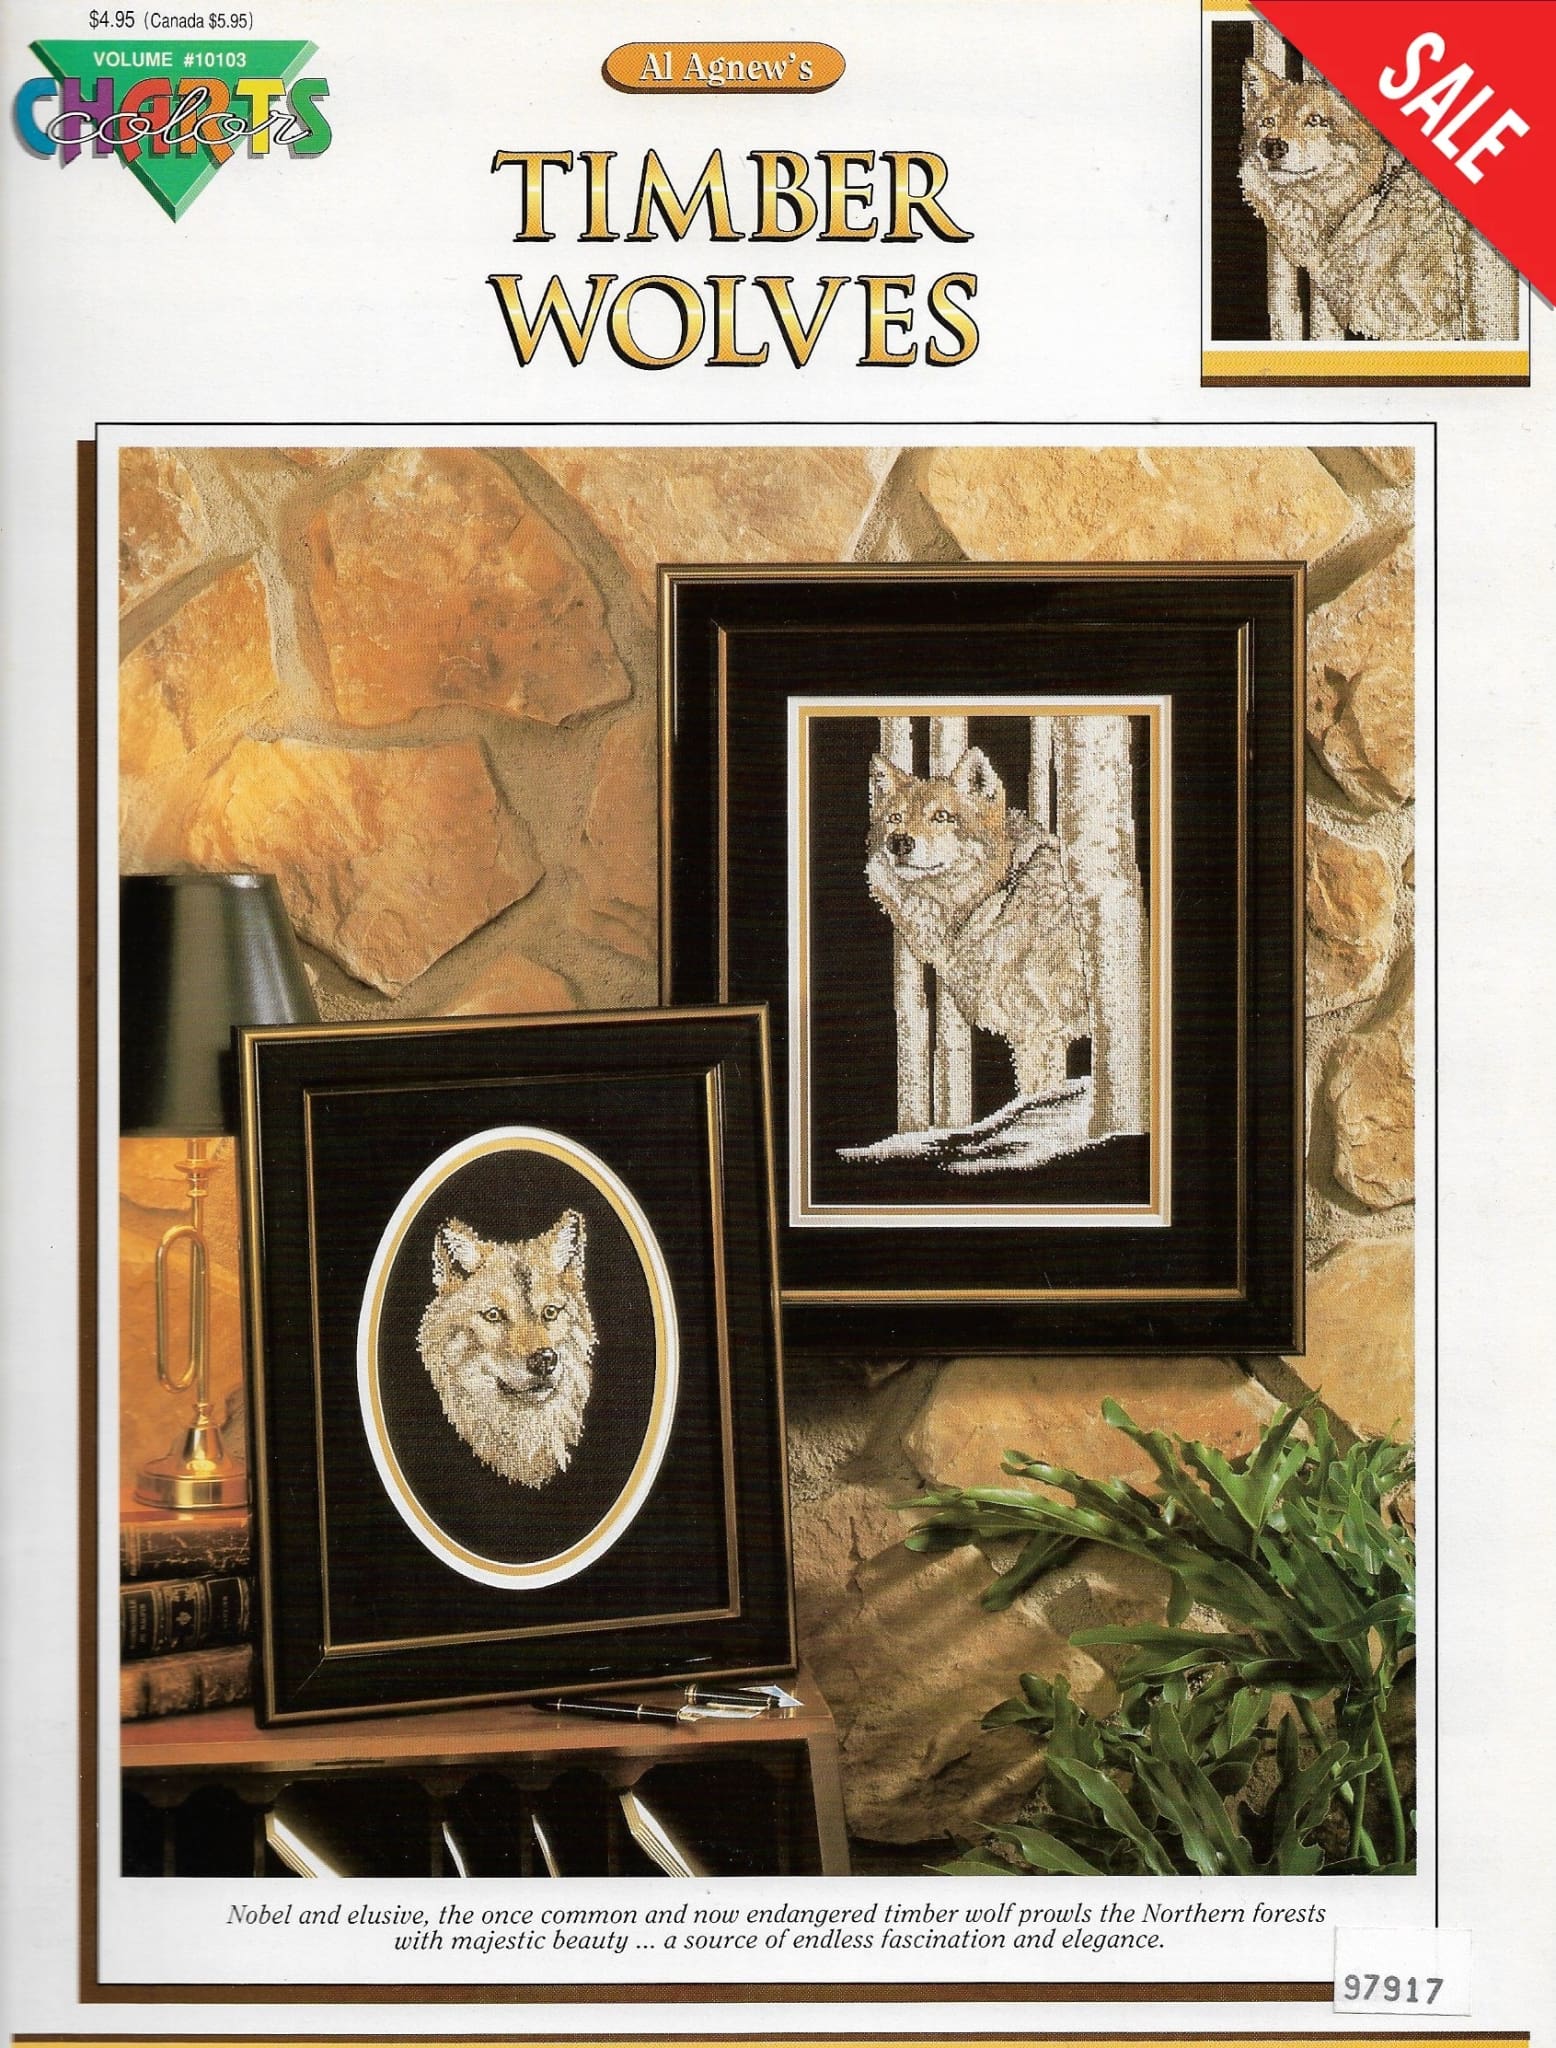 Color Charts Timber Wolves 10103 ross stitch pattern